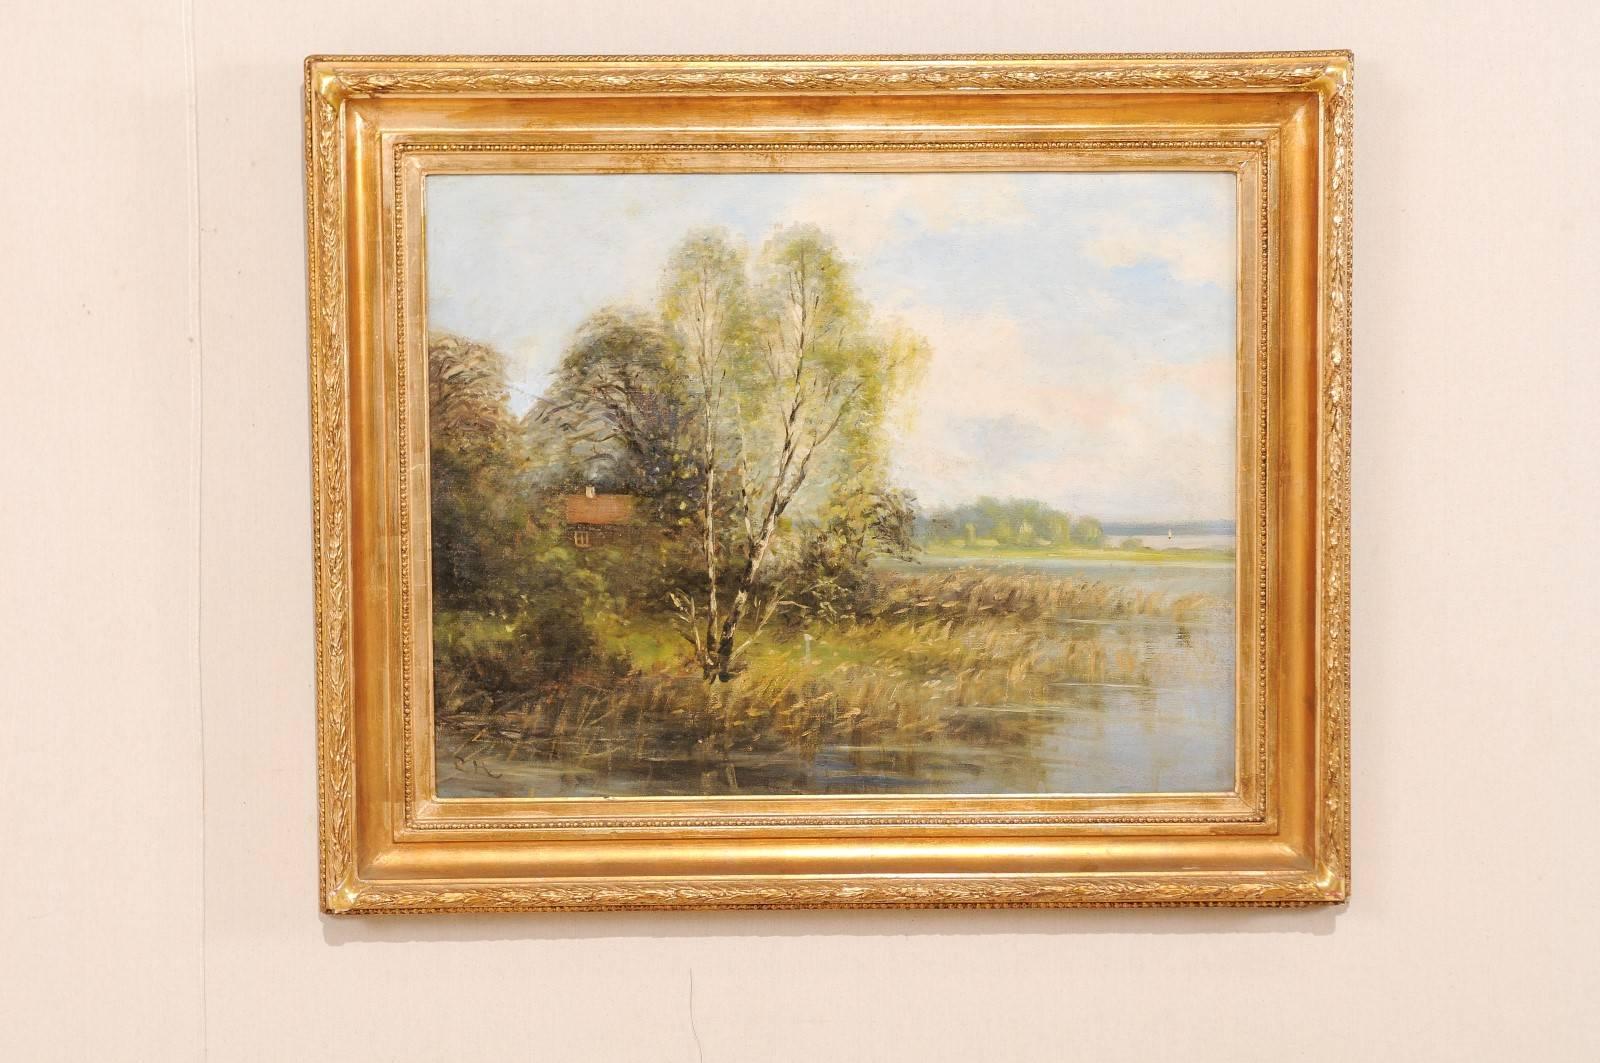 A Swedish landscape oil painting in frame. This is a lovely painting depicts a homestead and surrounding landscape by the water. This painting is within a gold wood carved frame. Signed 